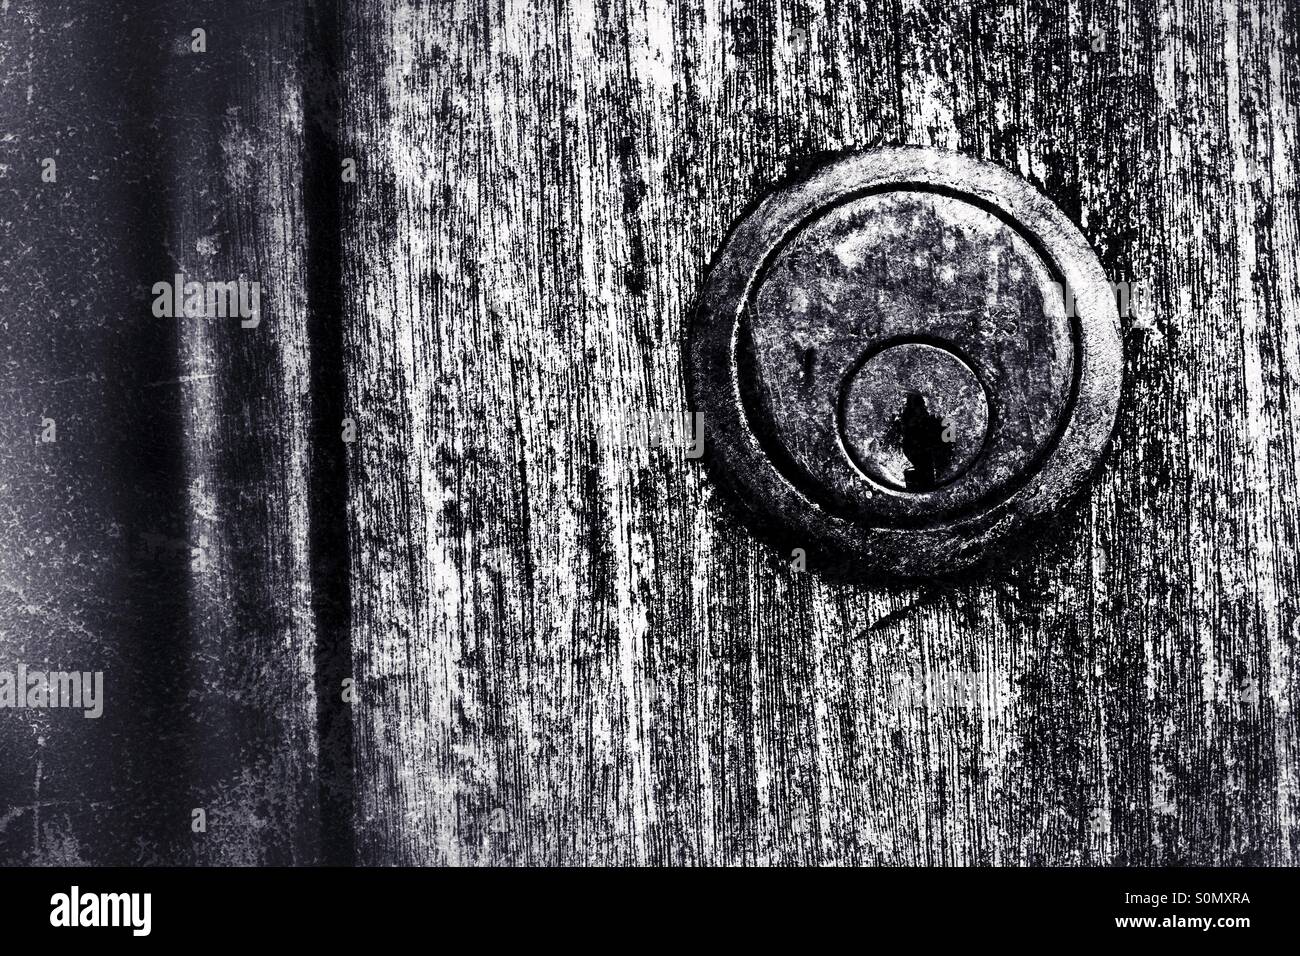 A worn and rusty Union door lock on a a grainy, split wooden door. Black and white image. Stock Photo